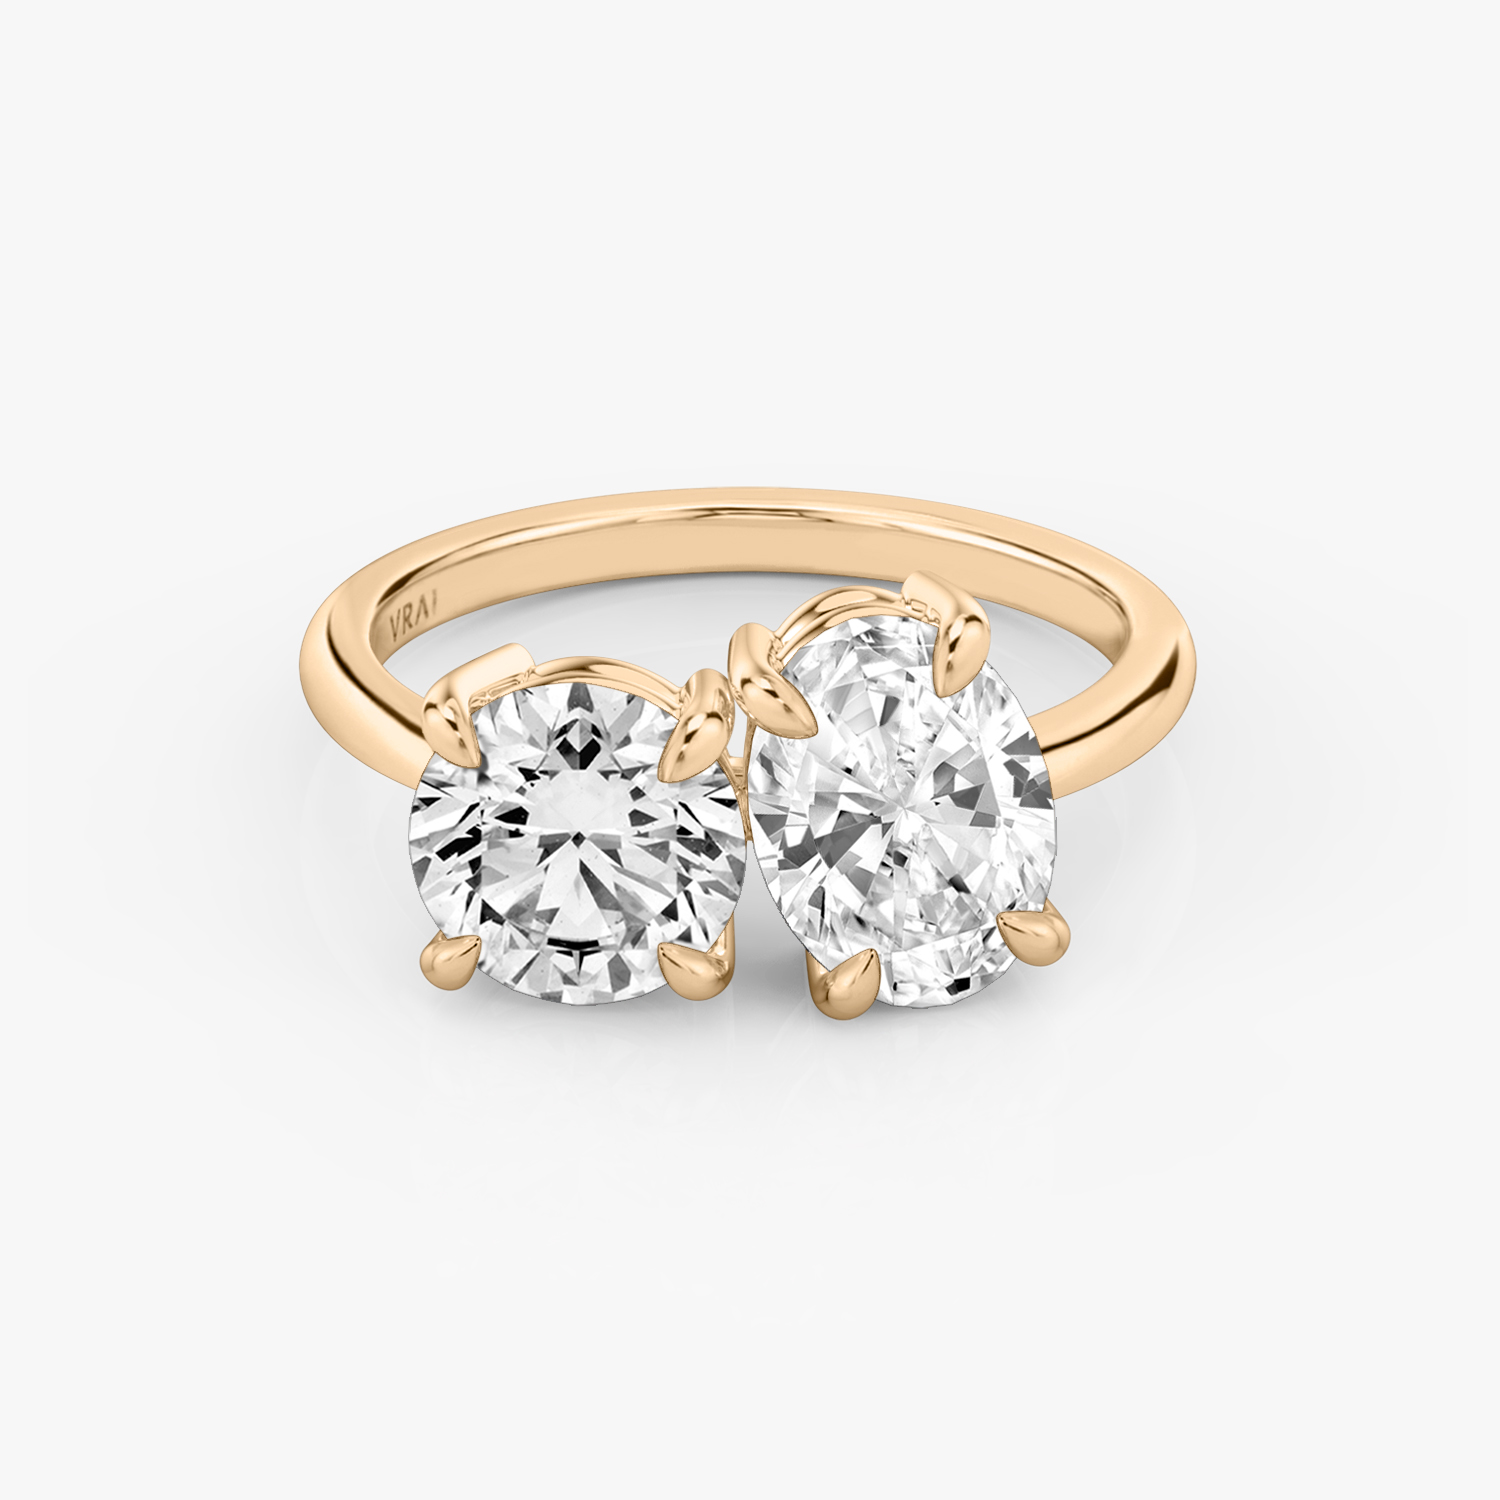 The Toi et Moi Round Brilliant and Oval Engagement Ring